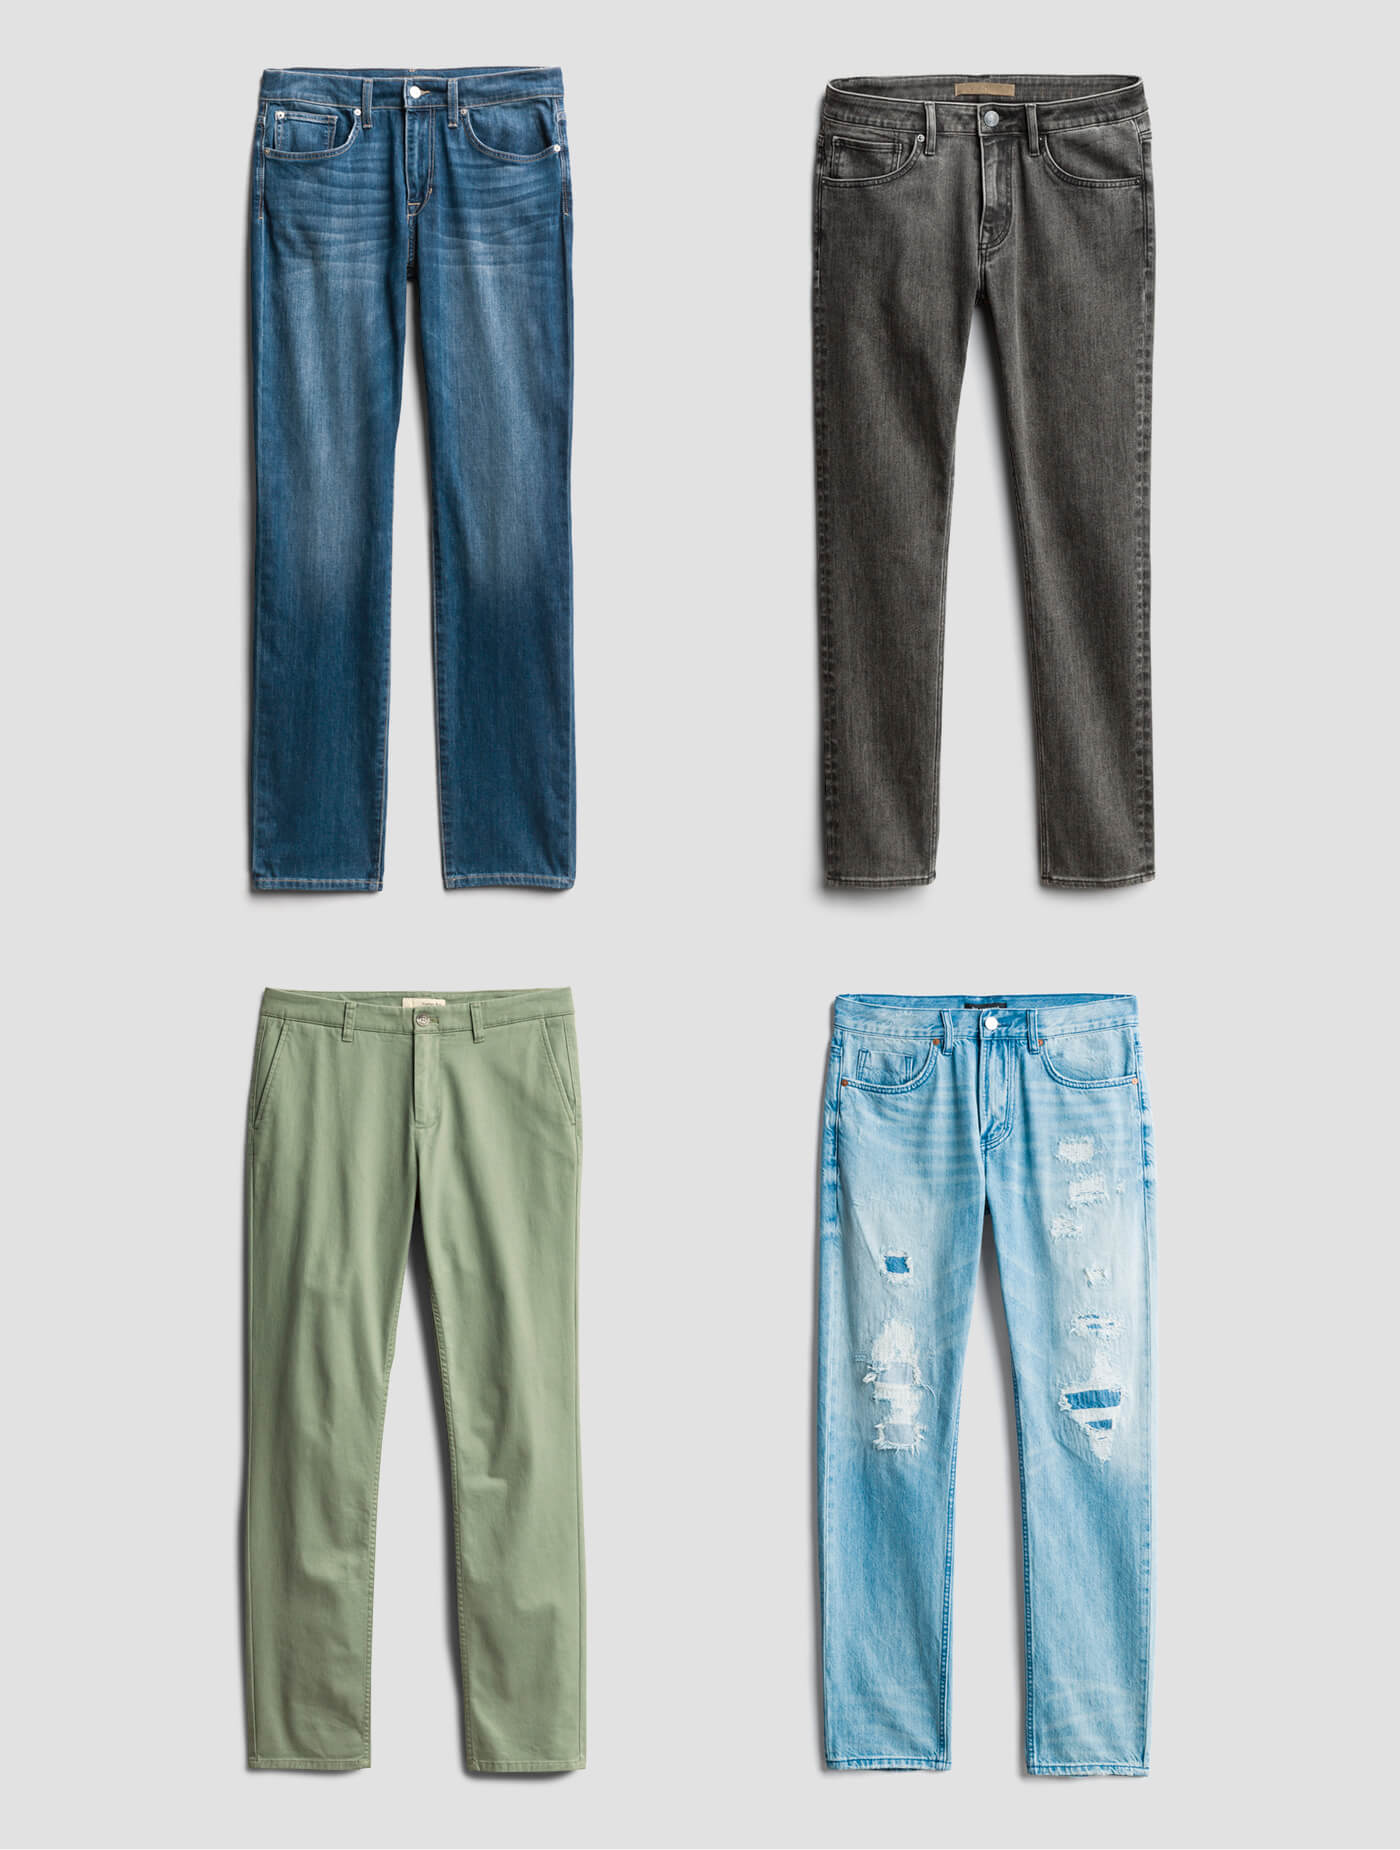 pants for men's festival outfits